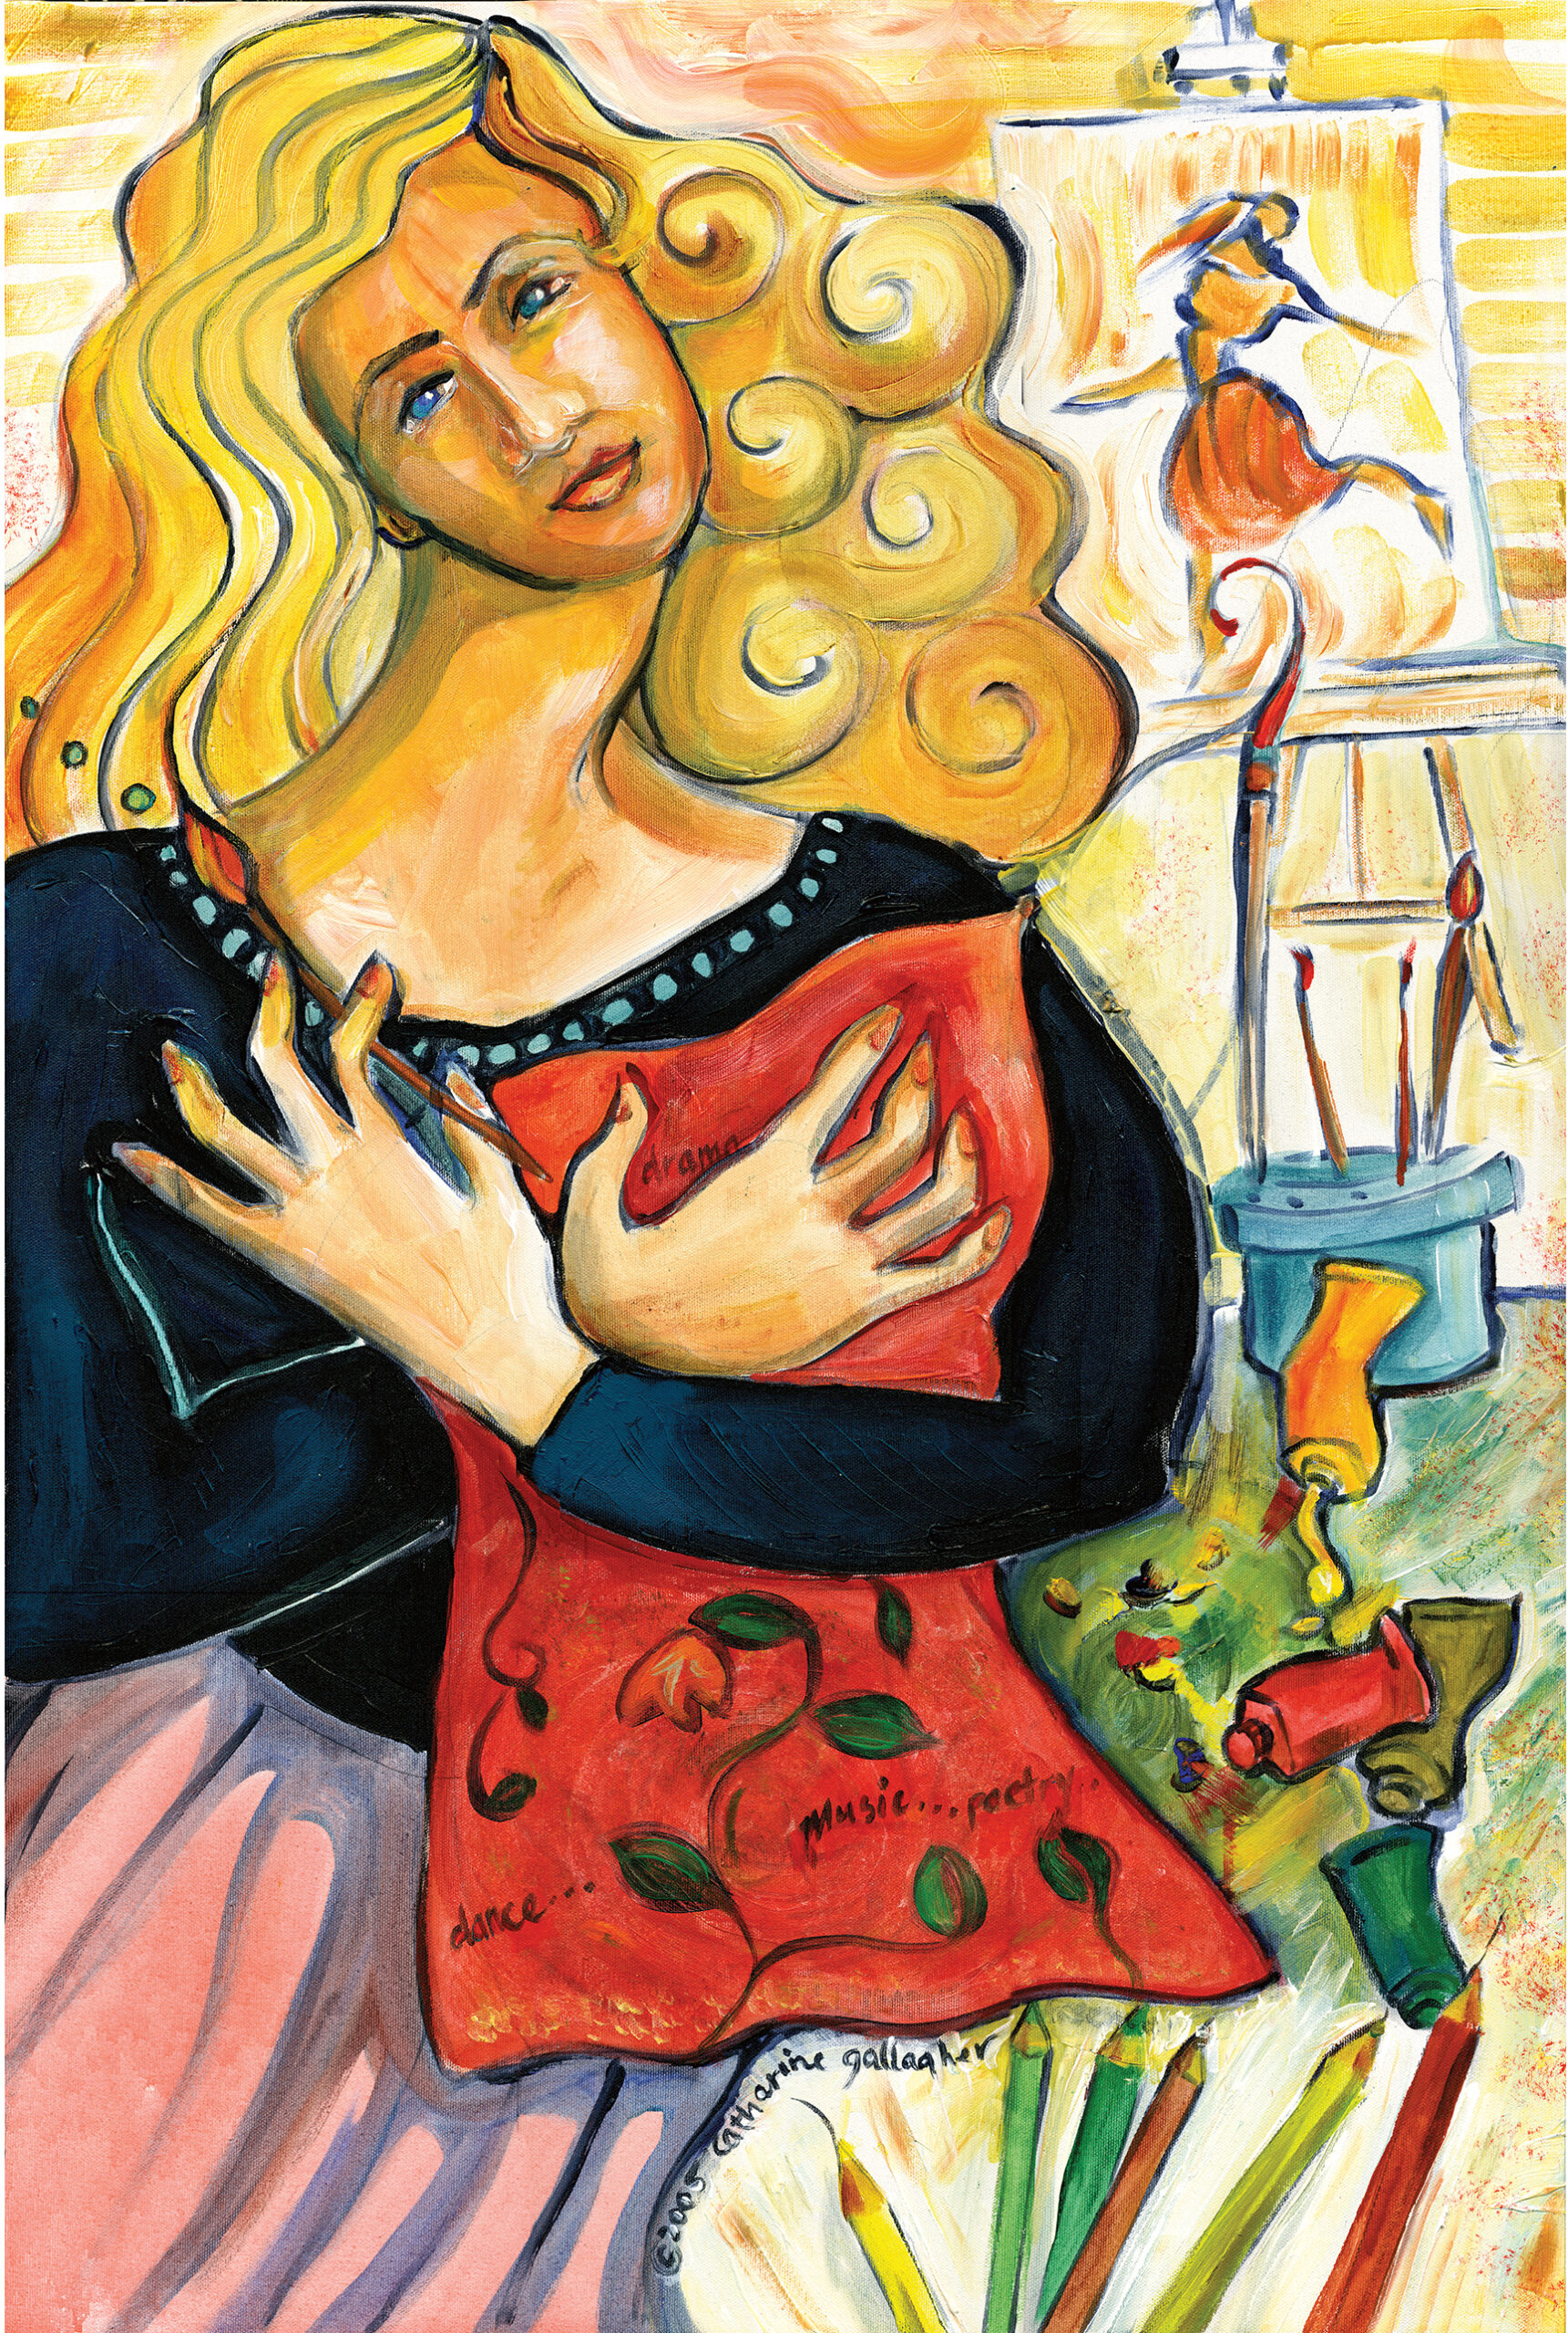 For The Love Of Art, 2005, Acrylic on Canvas